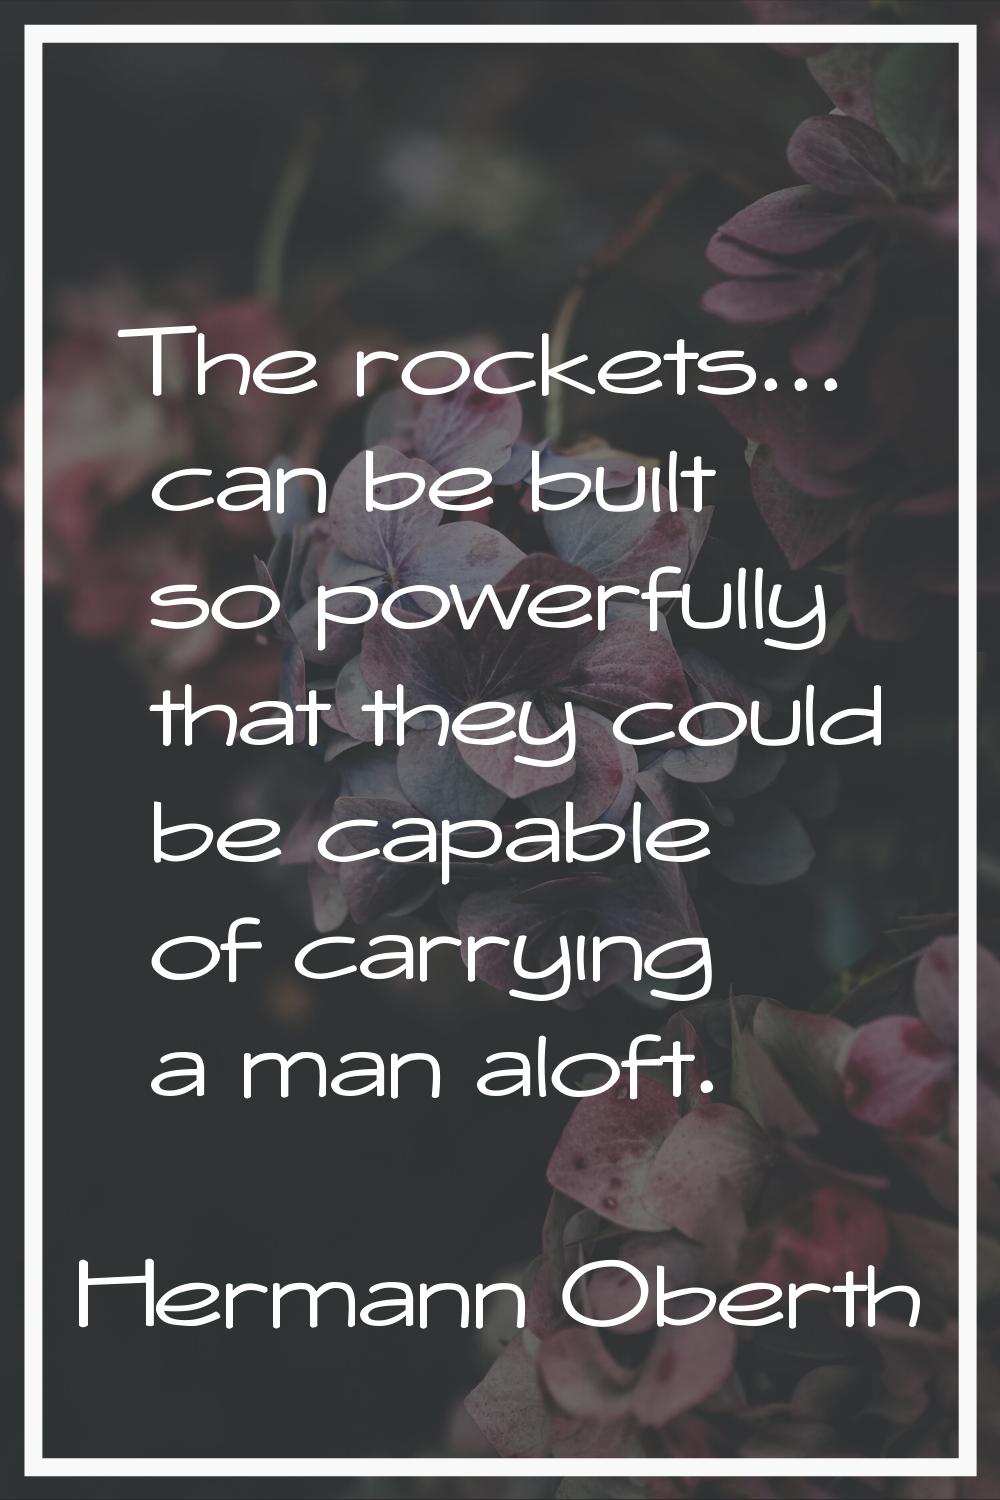 The rockets... can be built so powerfully that they could be capable of carrying a man aloft.